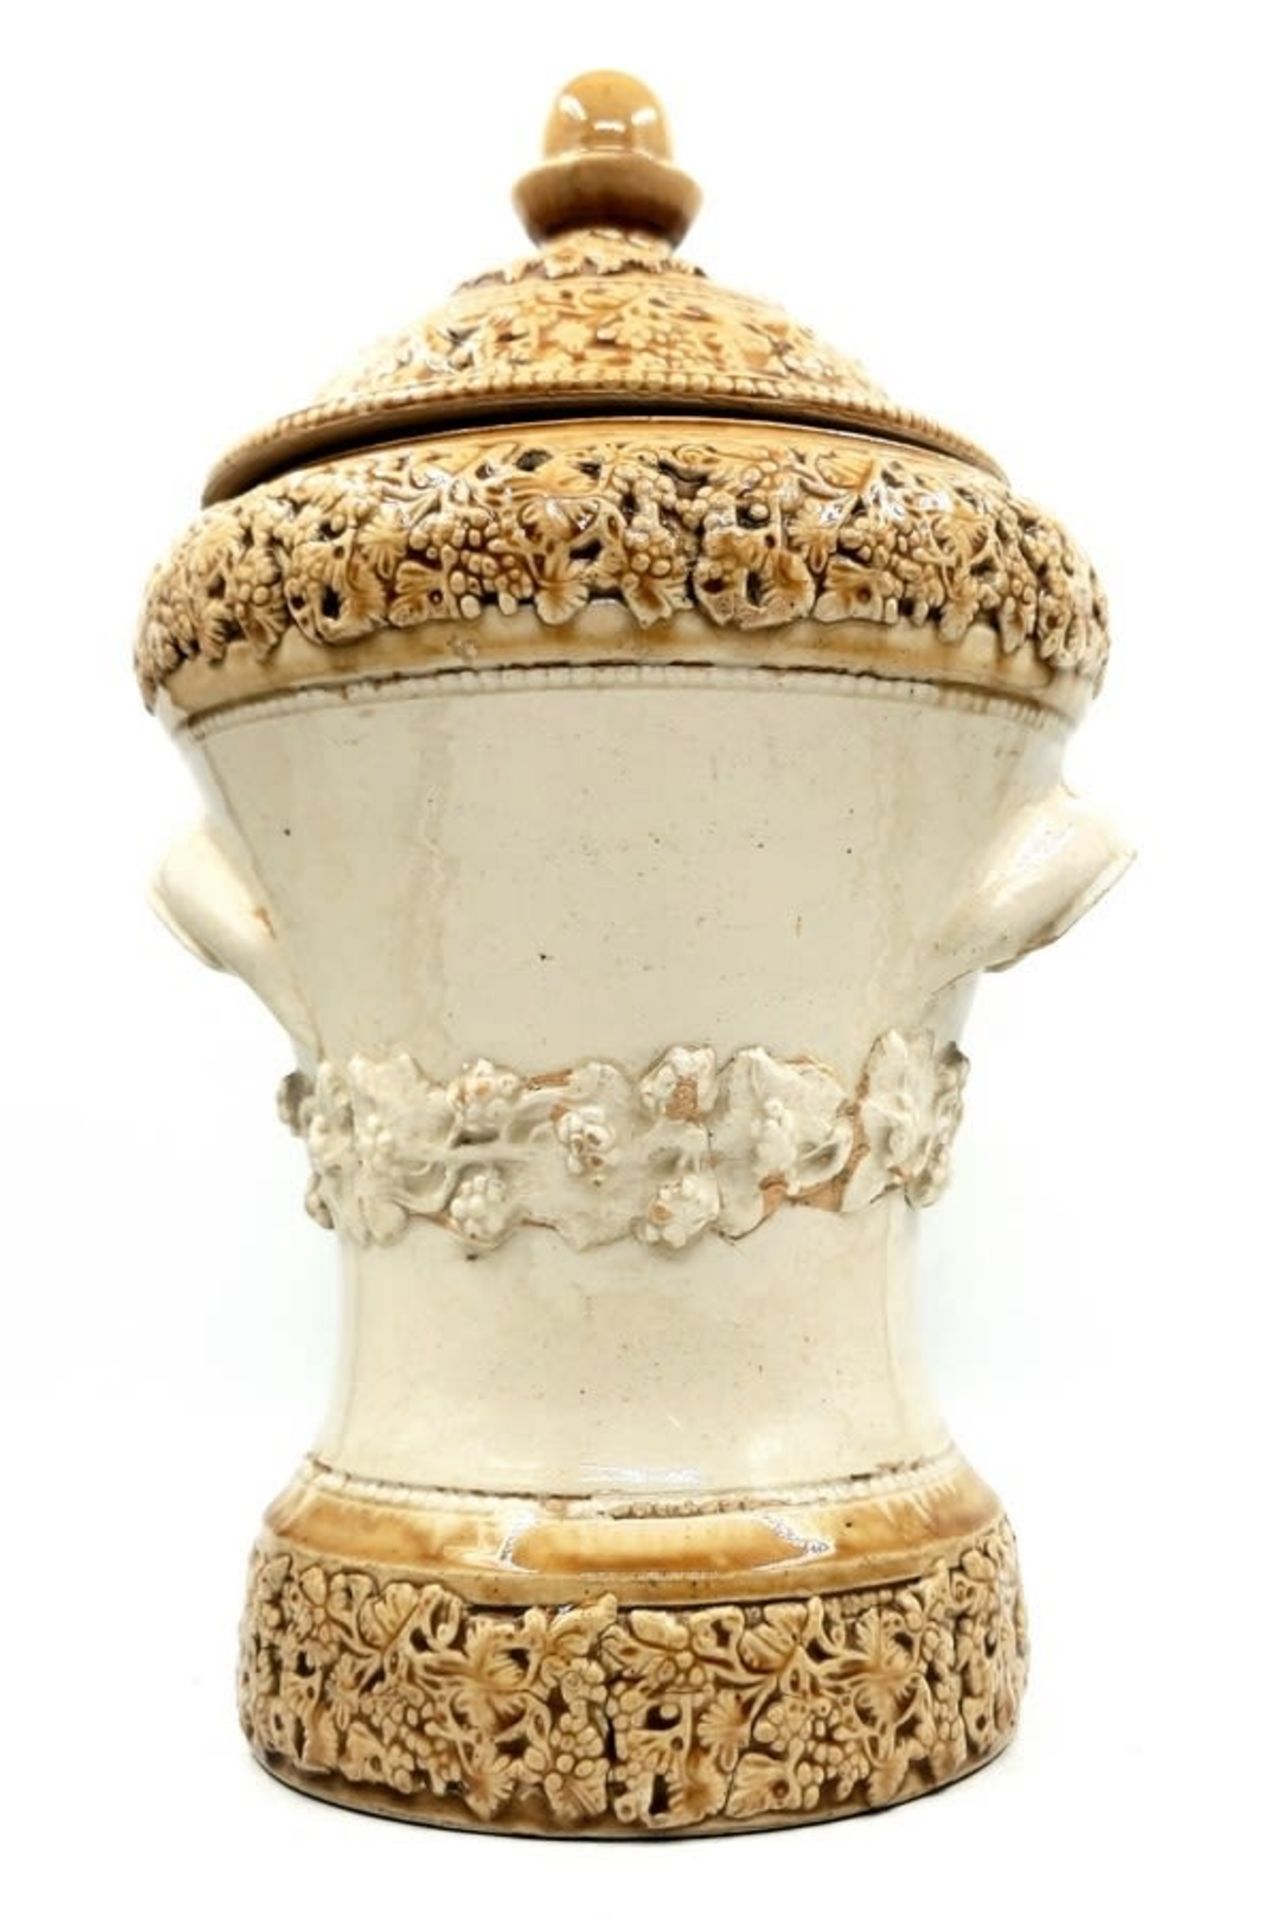 Antique English water tank from the 19th century, made of ceramic, cork stopper and metal faucet, - Image 5 of 11